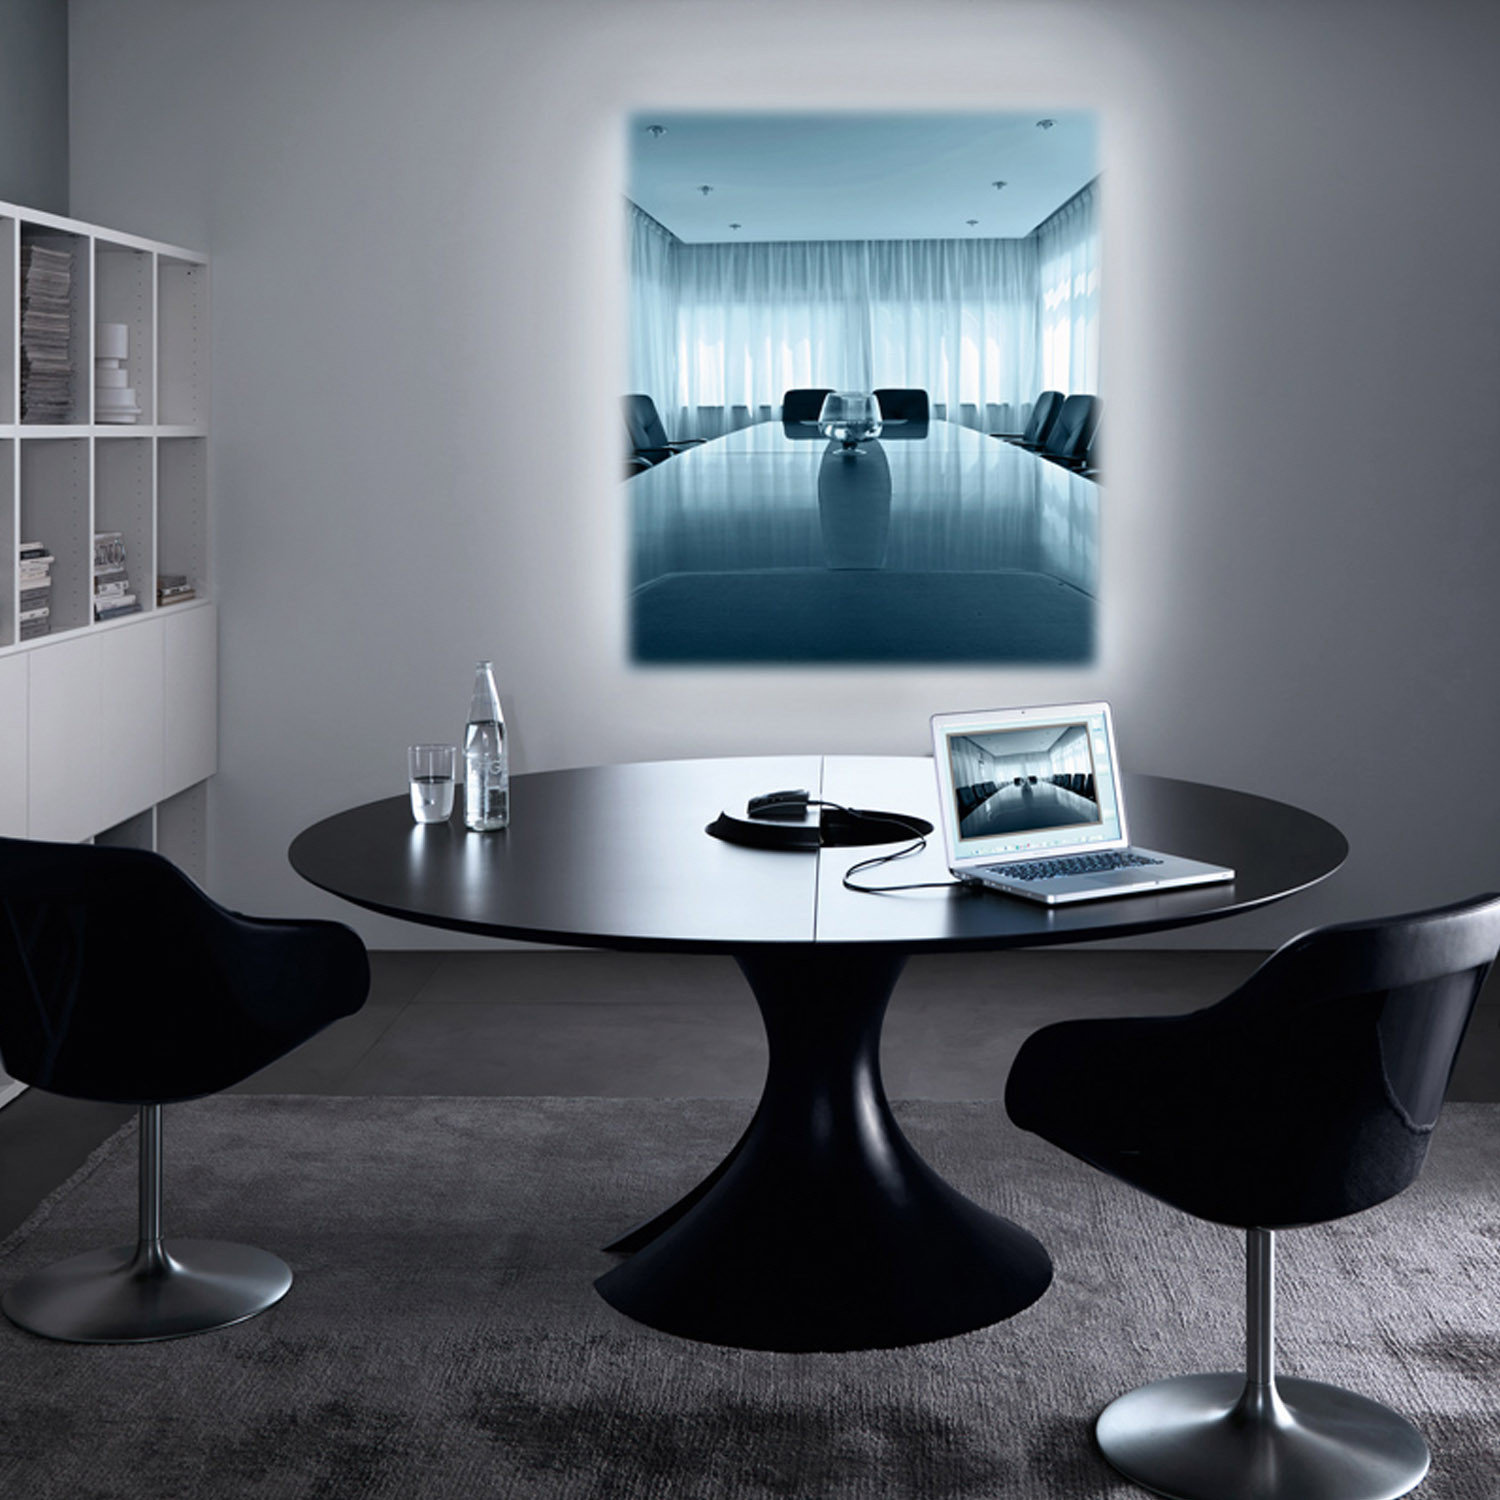 Ola Meeting Table is available in a wide range of finishes